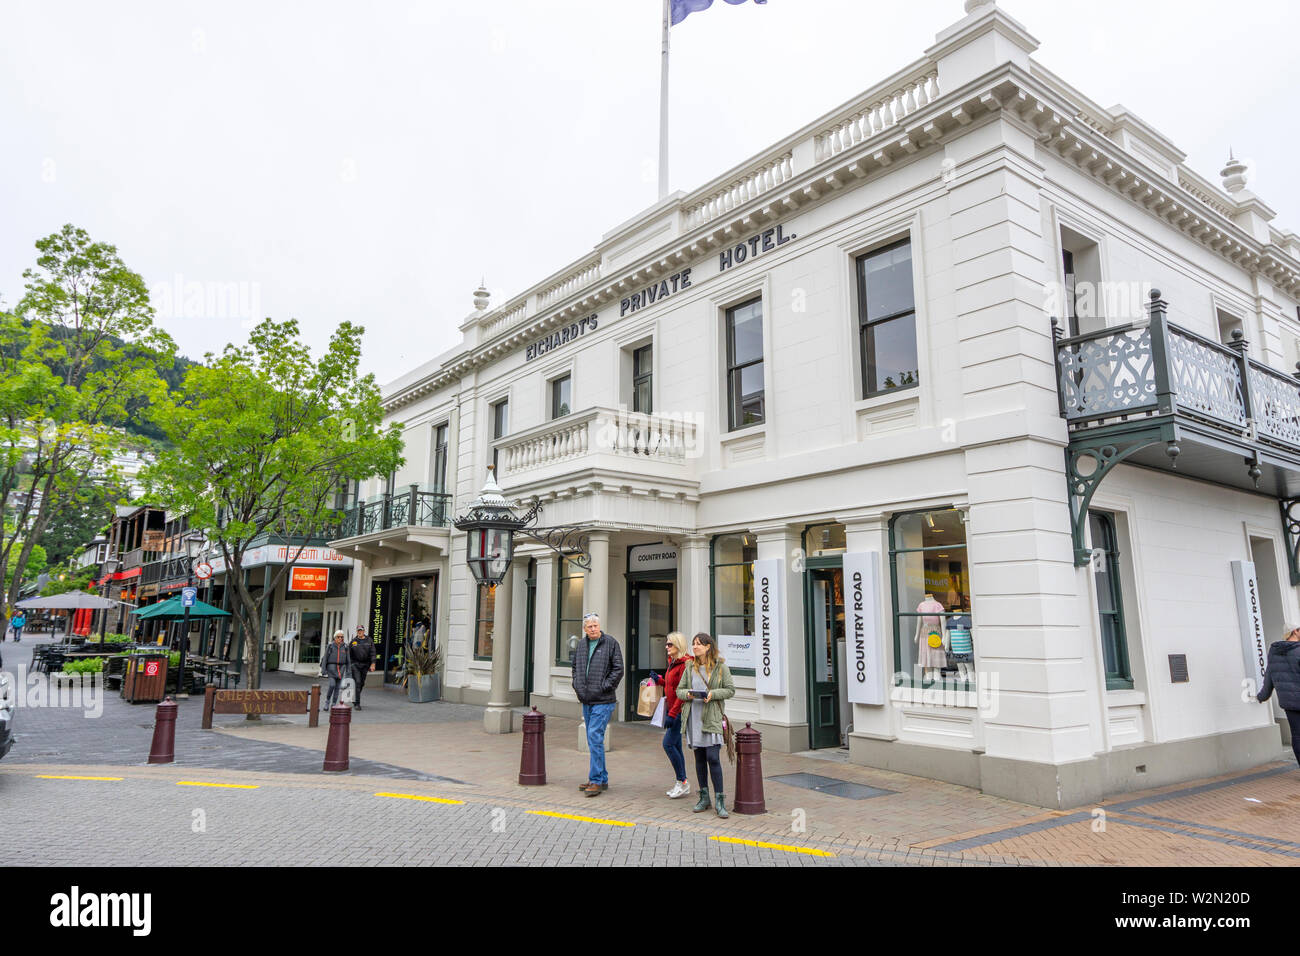 Eichardt's Private Hotel Building, Marine parade Queenstown New Zealand Stock Photo